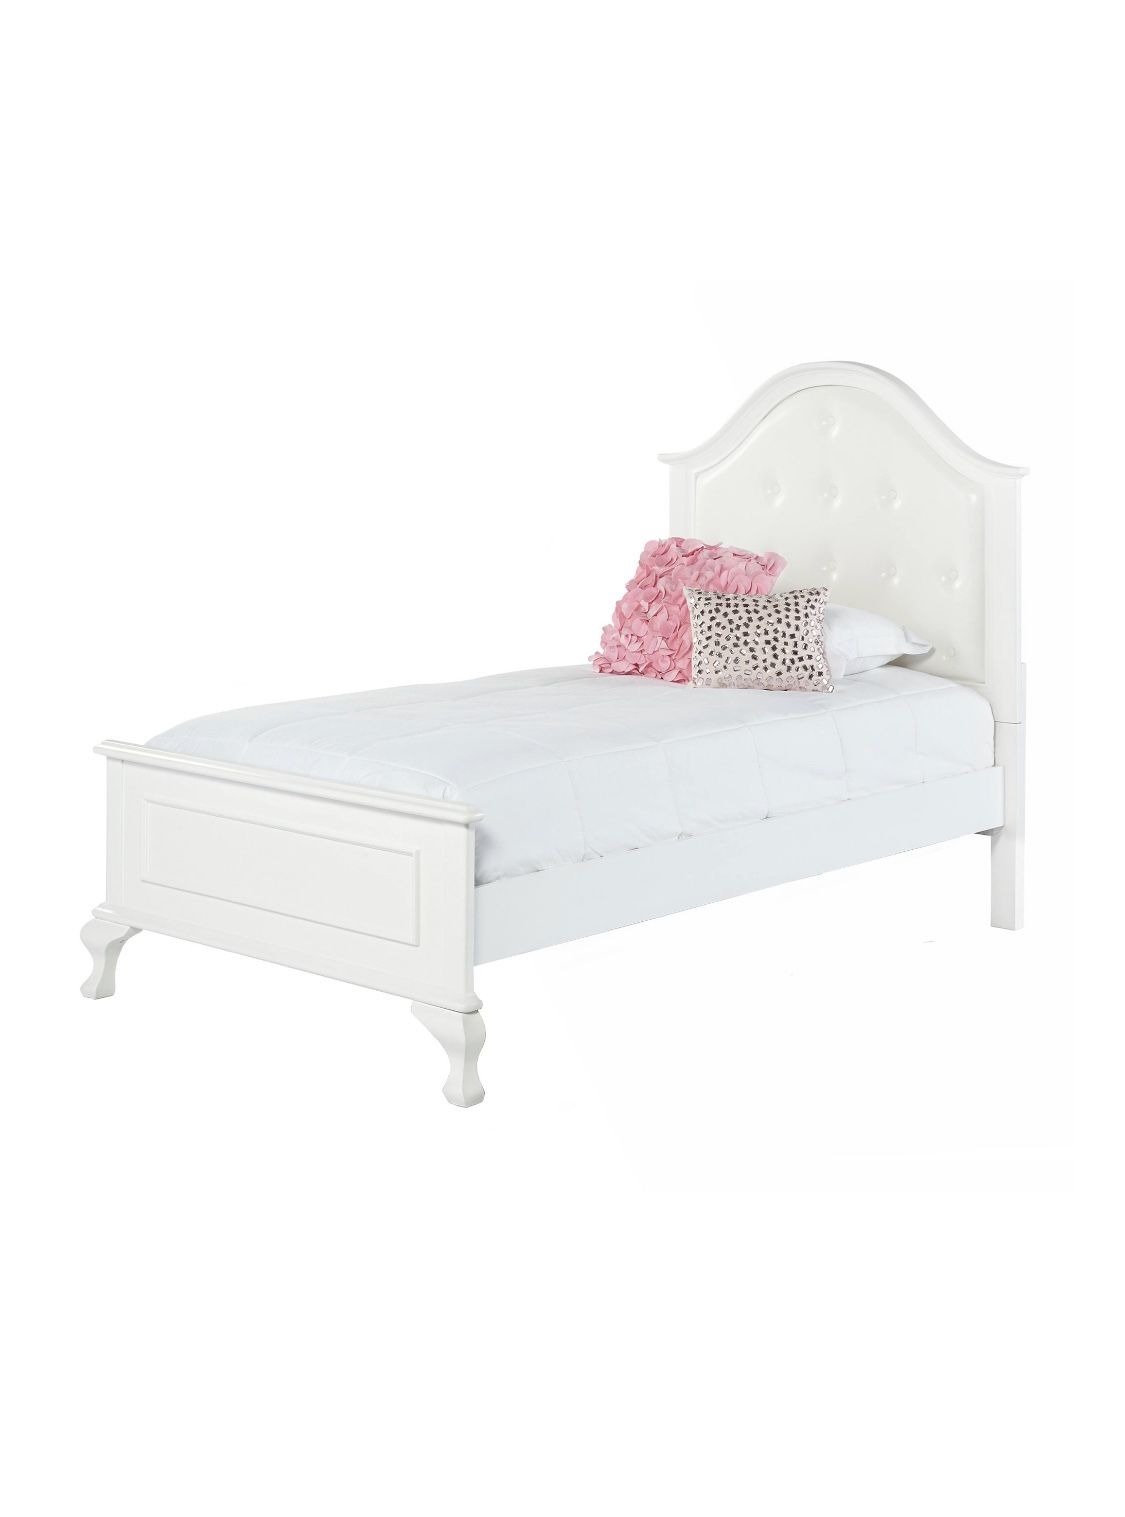 NEED GONE / Jenna Twin Panel Bed - Frame Only